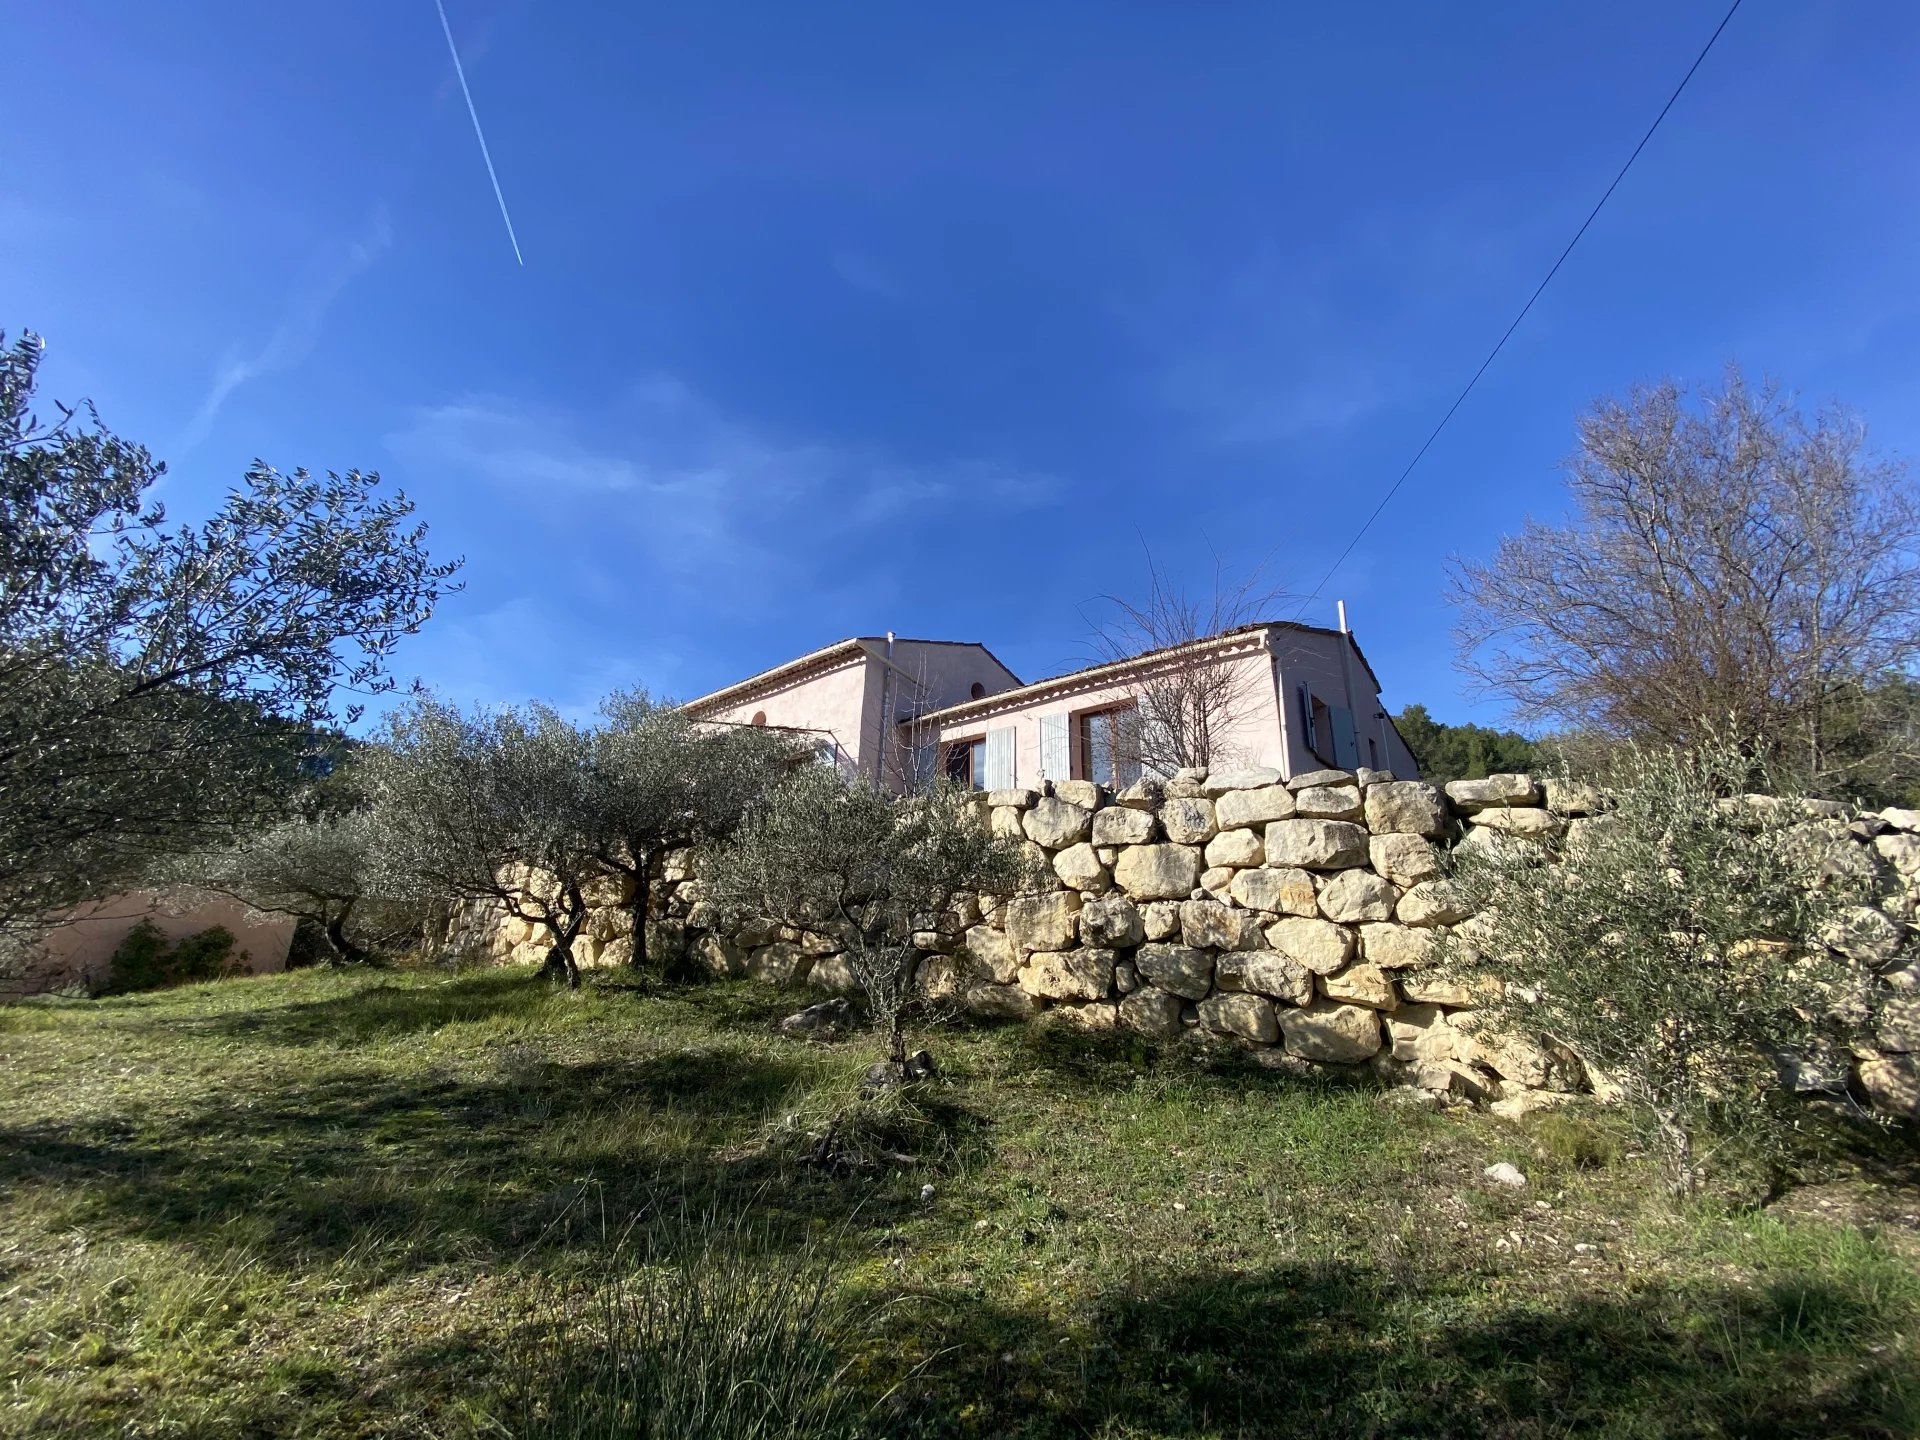 ENTRECASTEAUX - Atypical 5-room villa on a plot of over 4000m2 with garage and workshop.